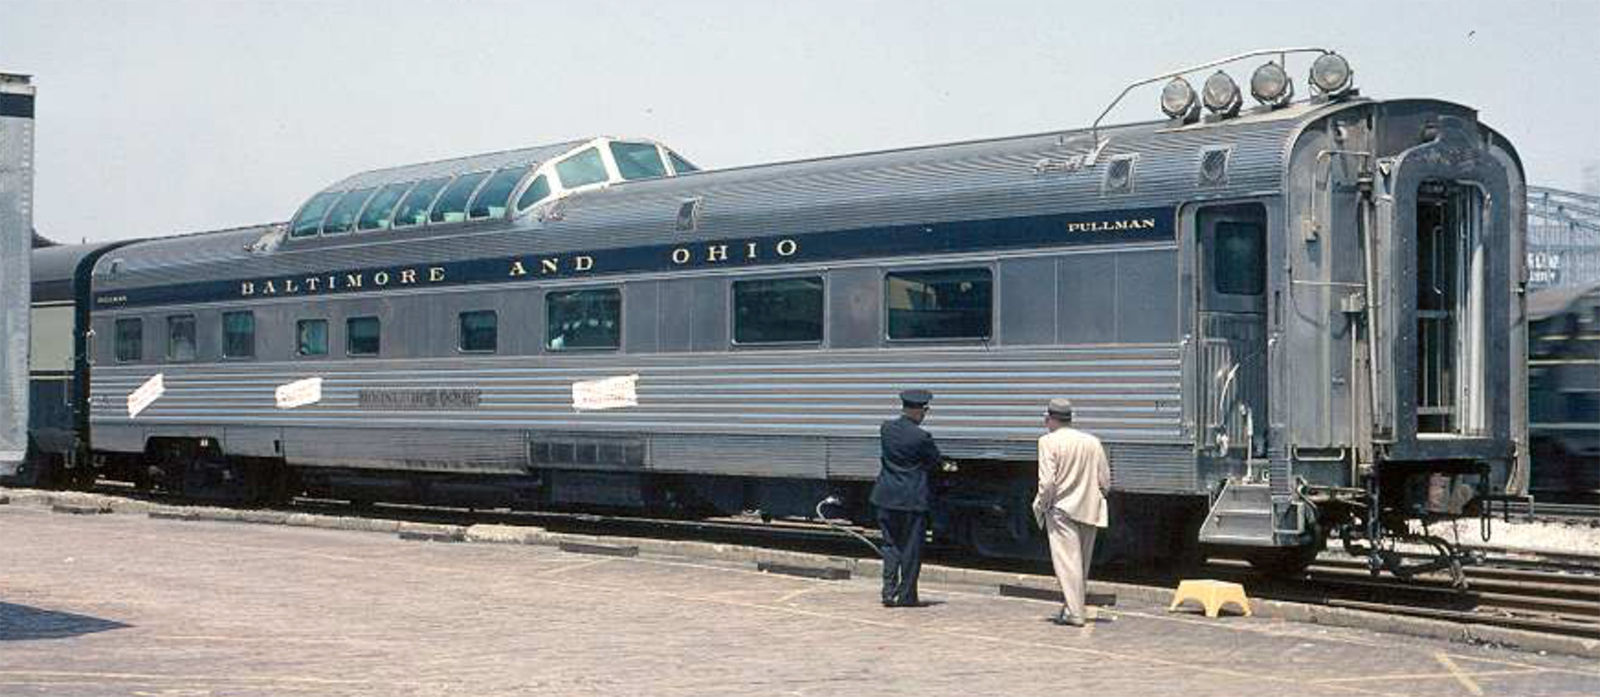 Using classic train cars, including a fully-restored historic Moonlight Dome Lounge Car, the museum is offering private rail car service between Roanoke and Washington Nov. 10 through Nov. 13. Its cars will be attached to the rear of the regularly scheduled Amtrak trains. (Courtesy Virginia Transportation Museum)